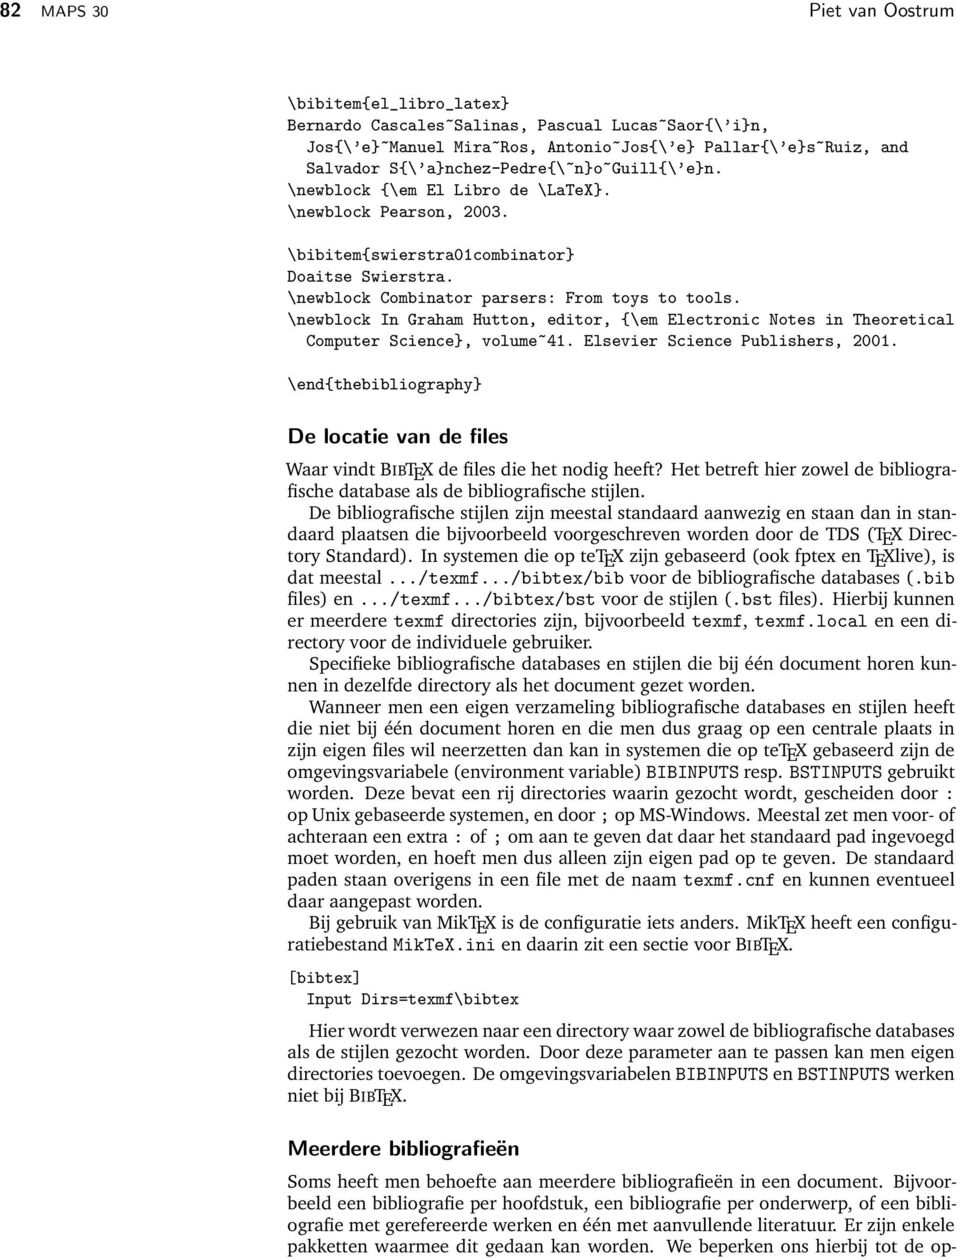 \newblock In Graham Hutton, editor, {\em Electronic Notes in Theoretical Computer Science, volume 41. Elsevier Science Publishers, 2001.